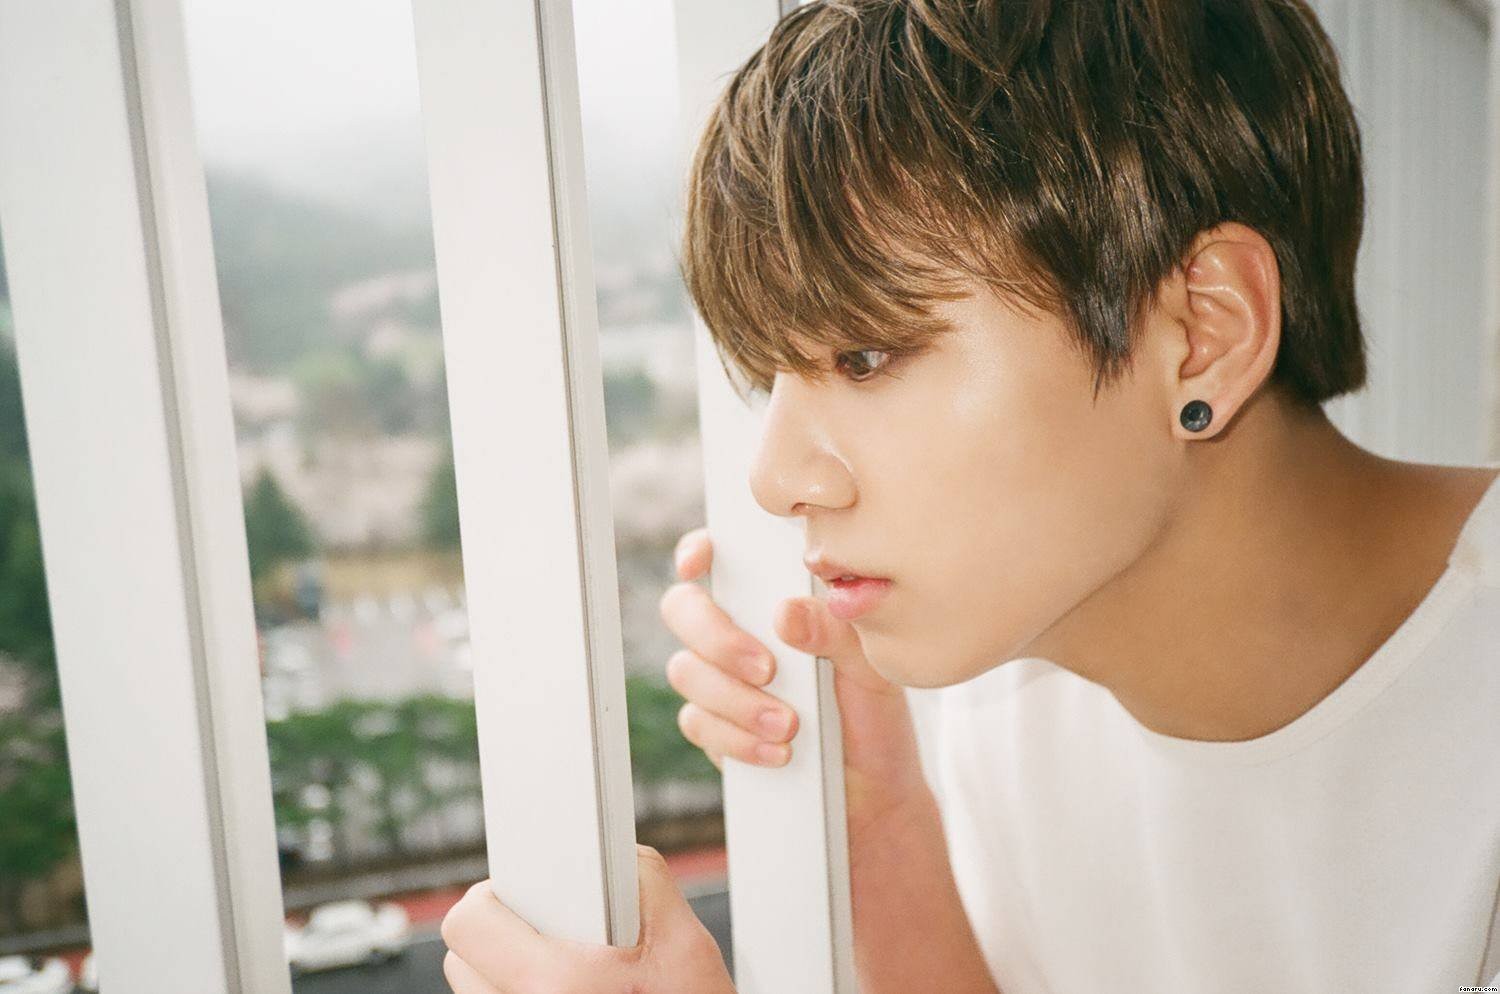 Jungkook The Most Beautiful Moment In Life - HD Wallpaper 